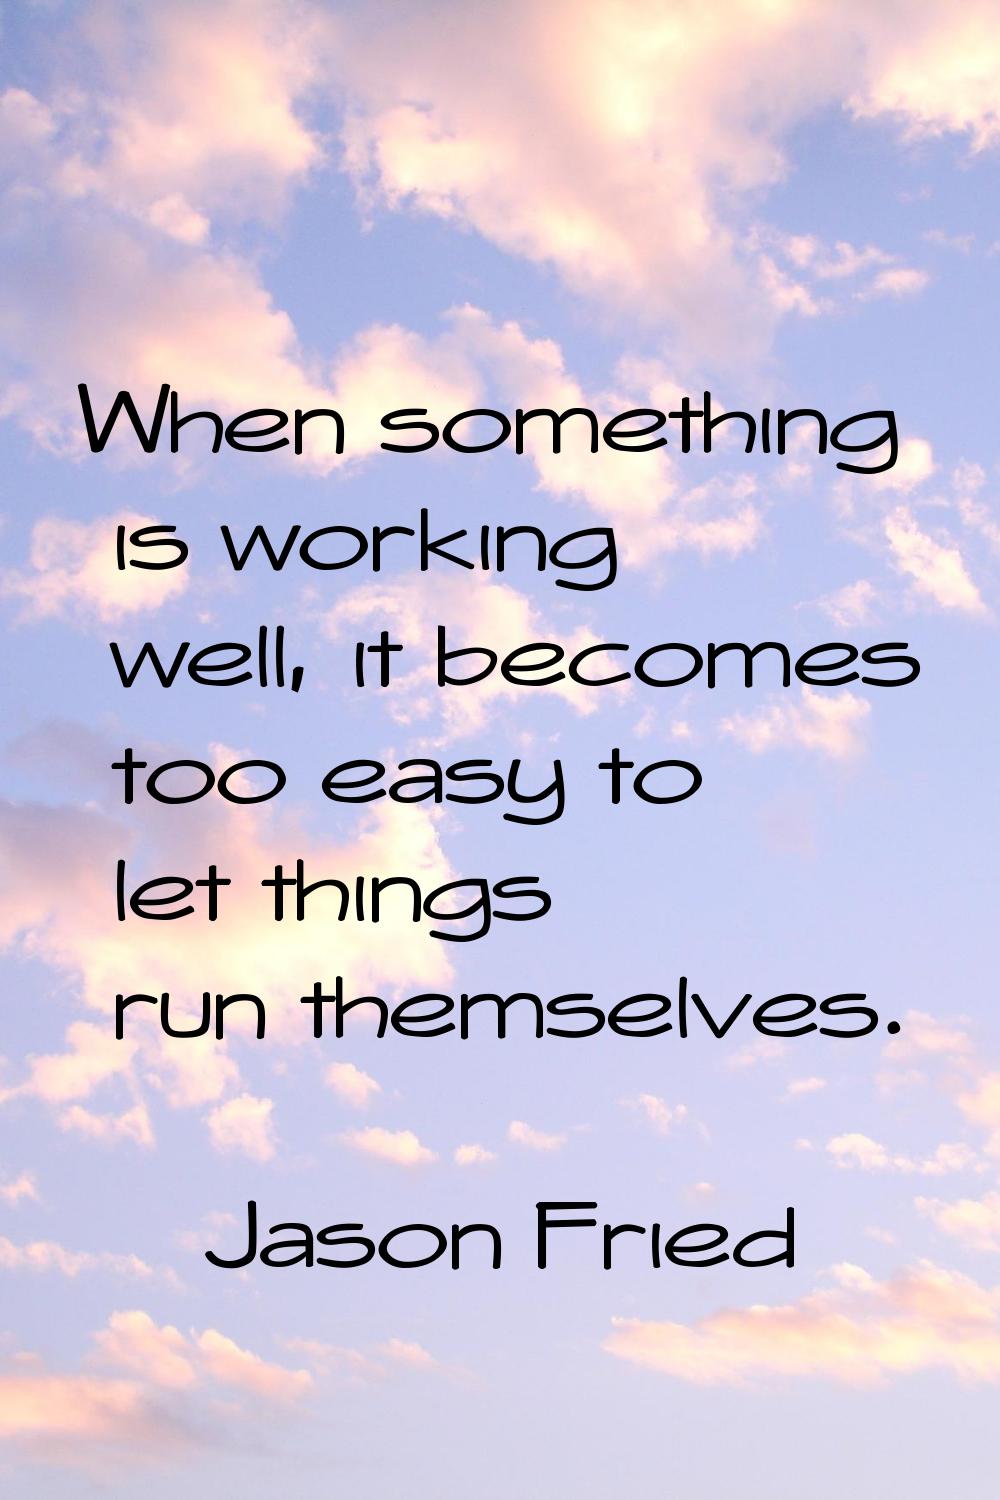 When something is working well, it becomes too easy to let things run themselves.